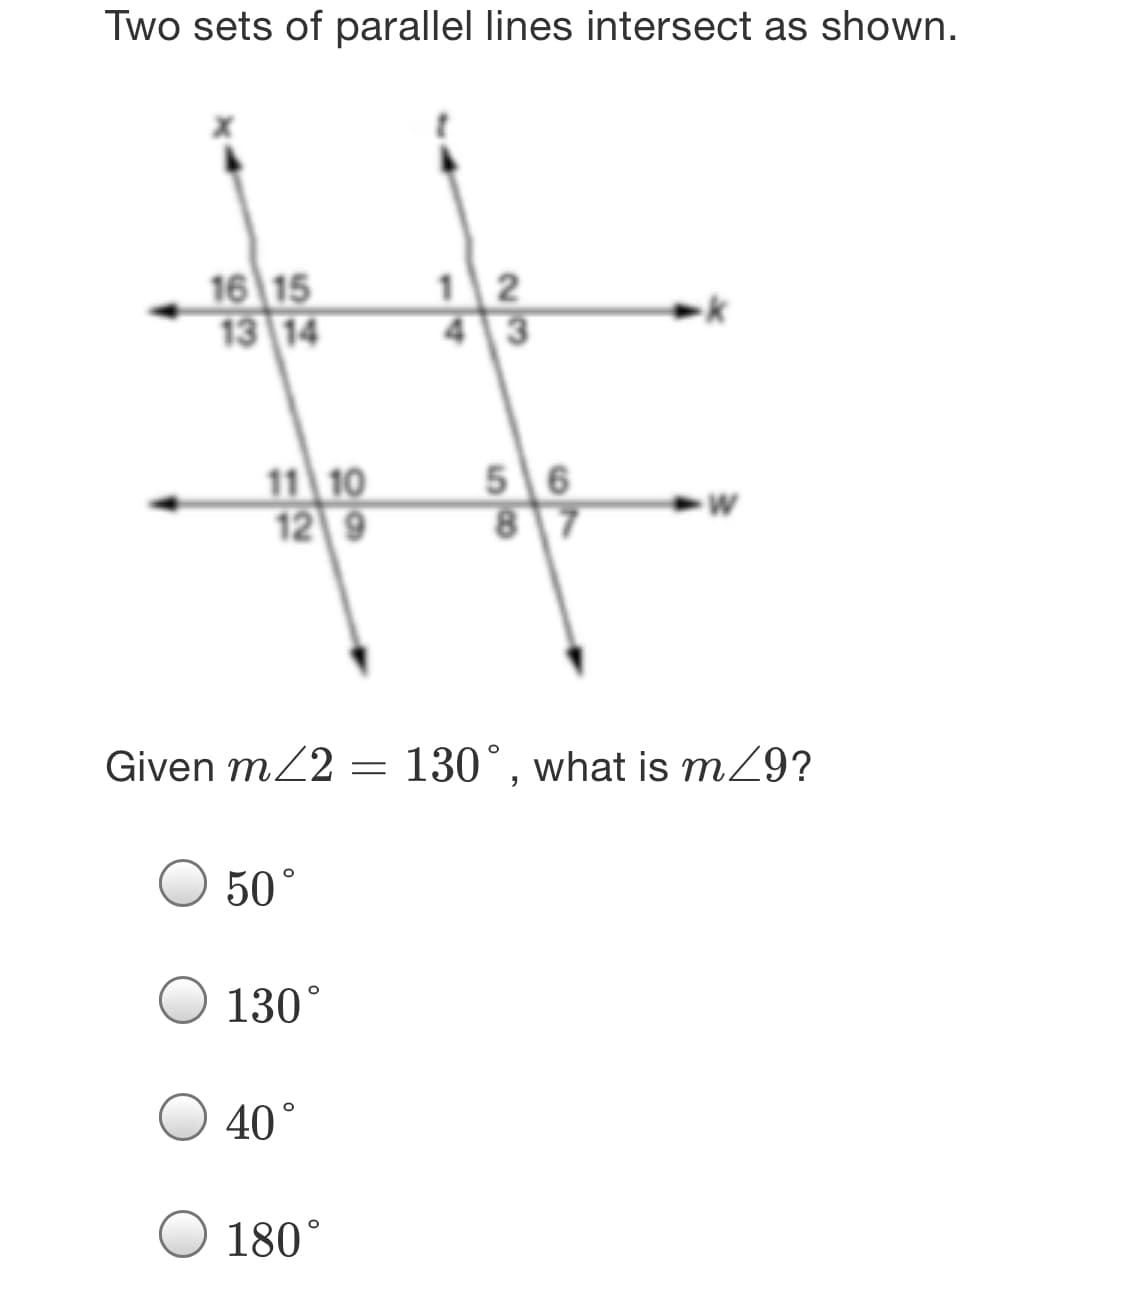 Two sets of parallel lines intersect as shown.
16 15
13 14
2
11 10
12 9
5 6
87
Given mZ2 = 130°, what is mZ9?
50°
130°
40°
180°
